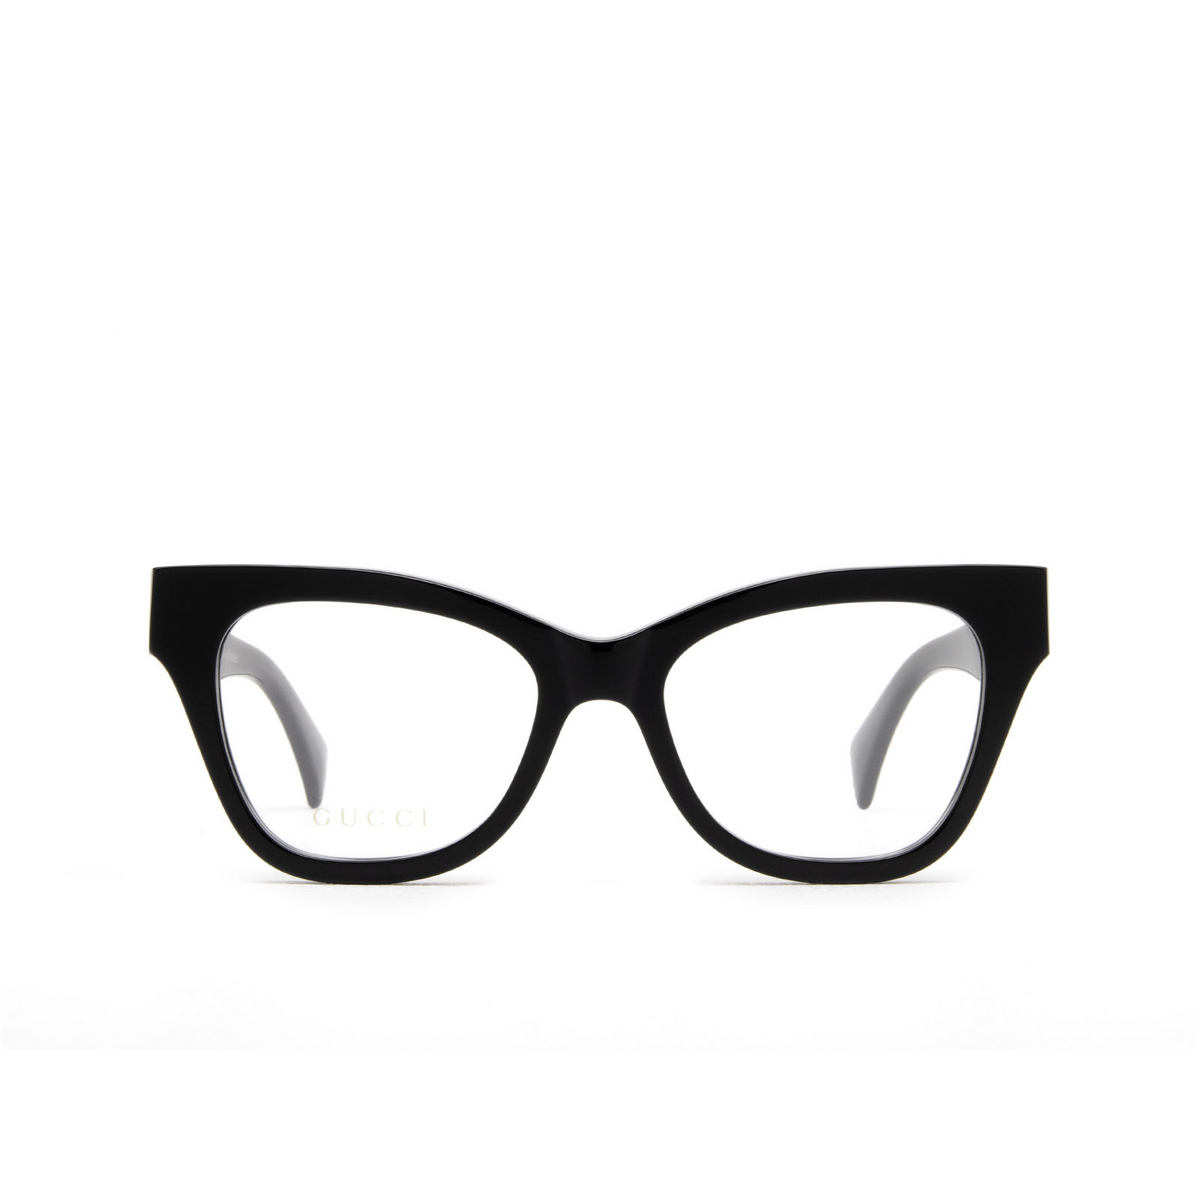 Gucci® Cat-eye Eyeglasses: GG1133O color 003 Black - front view